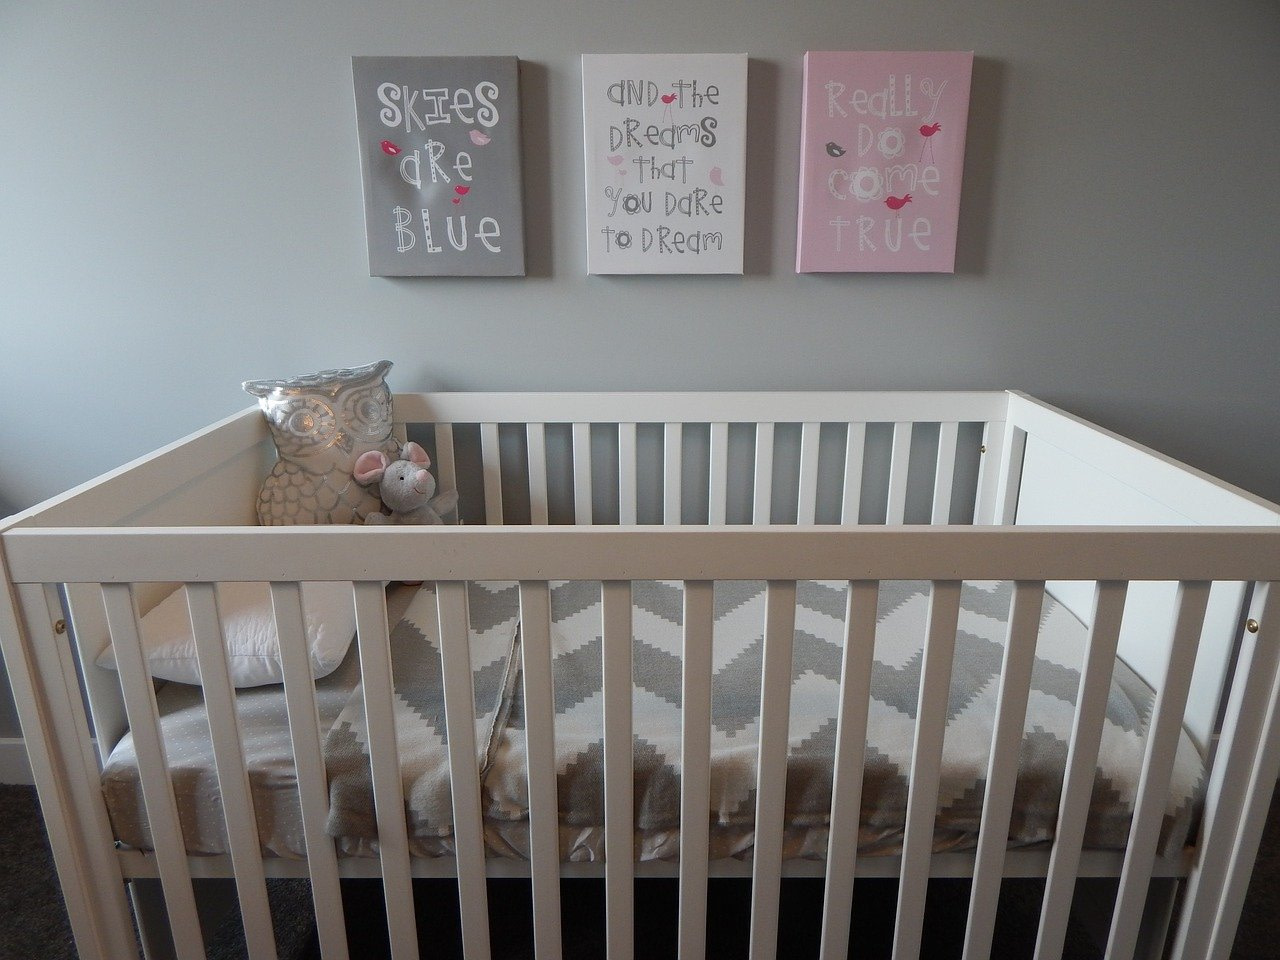 What Are The Common Mistakes To Never Make When Decorating A Baby’S Room?